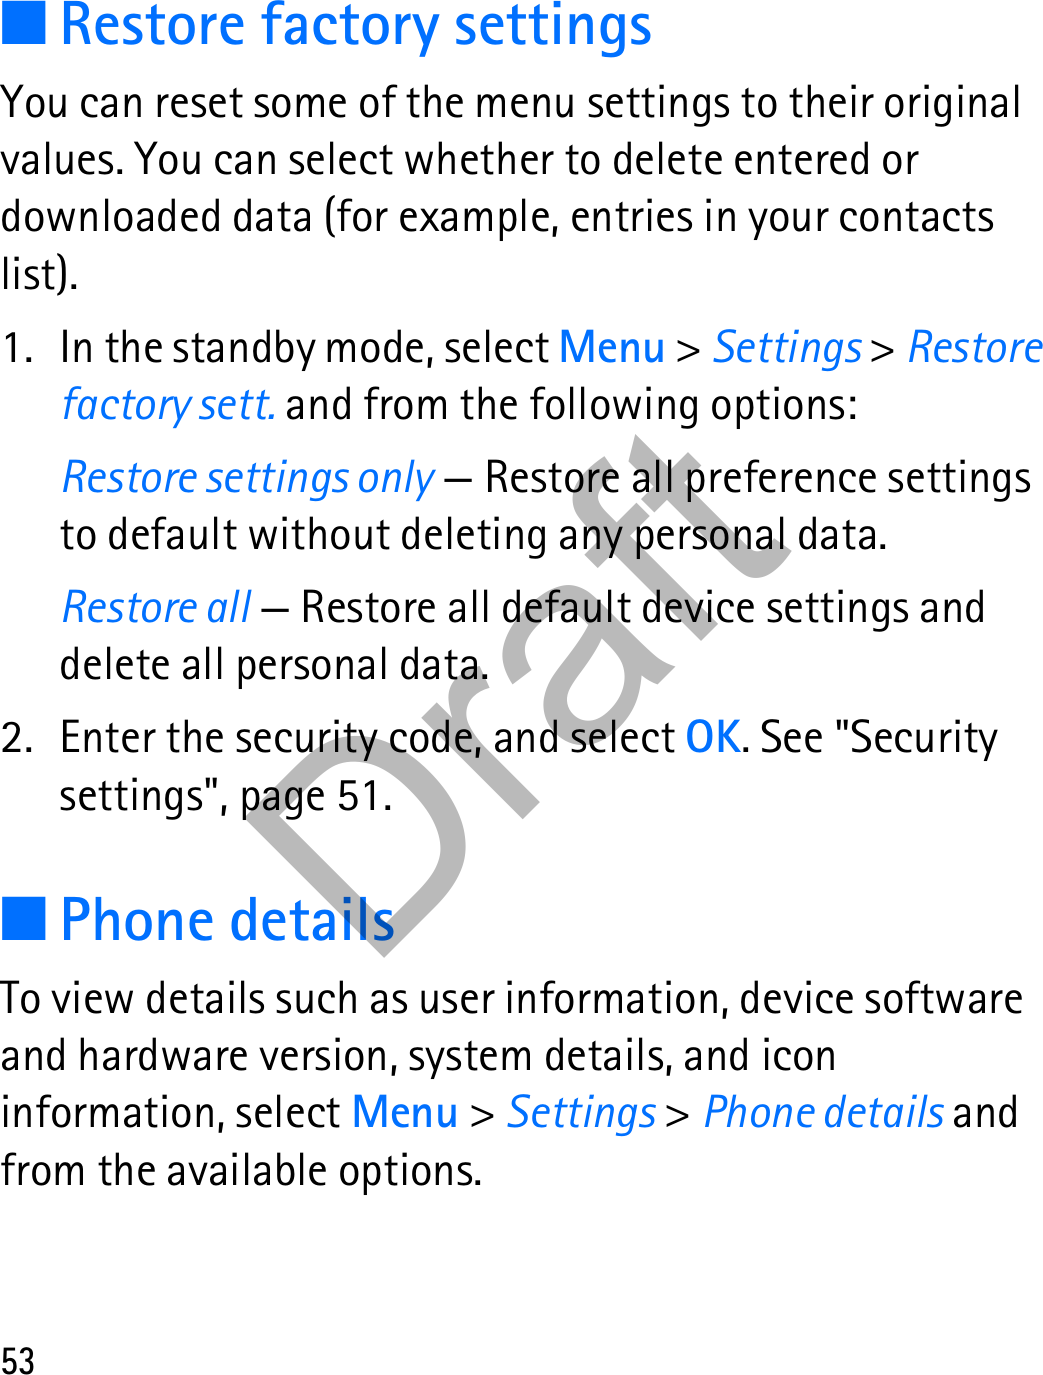 53■Restore factory settingsYou can reset some of the menu settings to their original values. You can select whether to delete entered or downloaded data (for example, entries in your contacts list).1. In the standby mode, select Menu &gt; Settings &gt; Restore factory sett. and from the following options:Restore settings only — Restore all preference settings to default without deleting any personal data.Restore all — Restore all default device settings and delete all personal data.2. Enter the security code, and select OK. See &quot;Security settings&quot;, page 51.■Phone detailsTo view details such as user information, device software and hardware version, system details, and icon information, select Menu &gt; Settings &gt; Phone details and from the available options.Draft